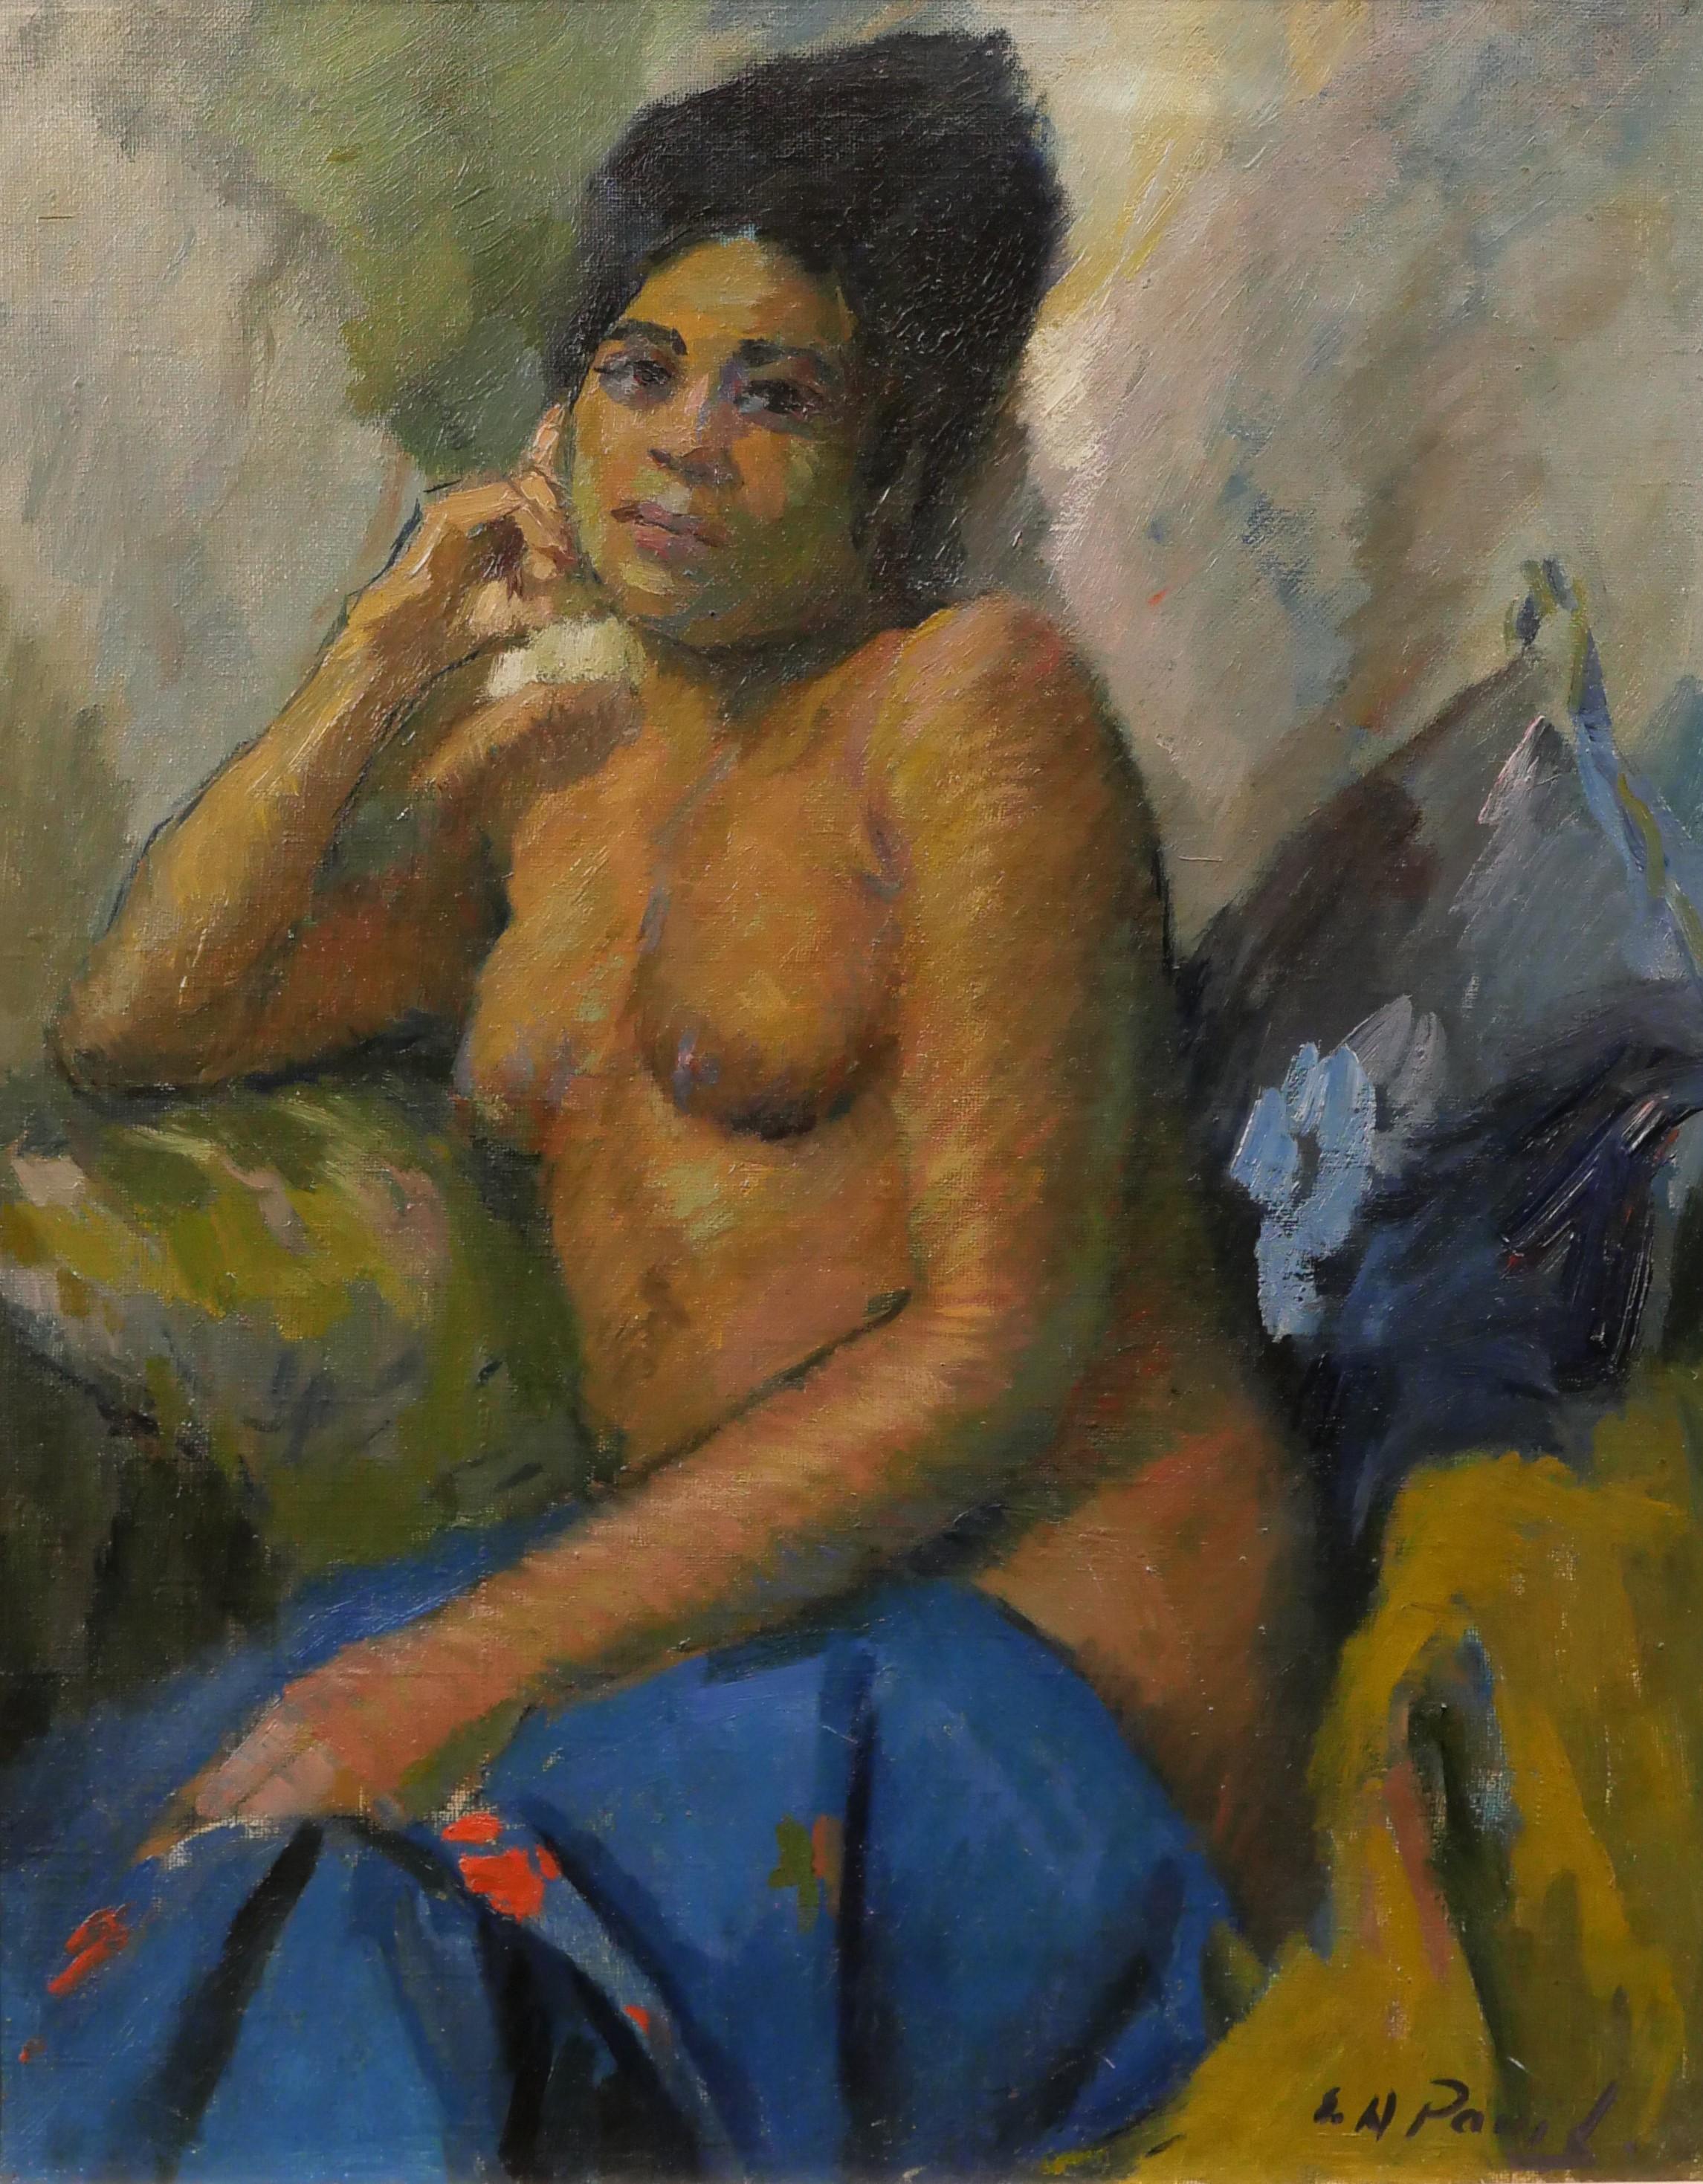 The Martinican nude woman